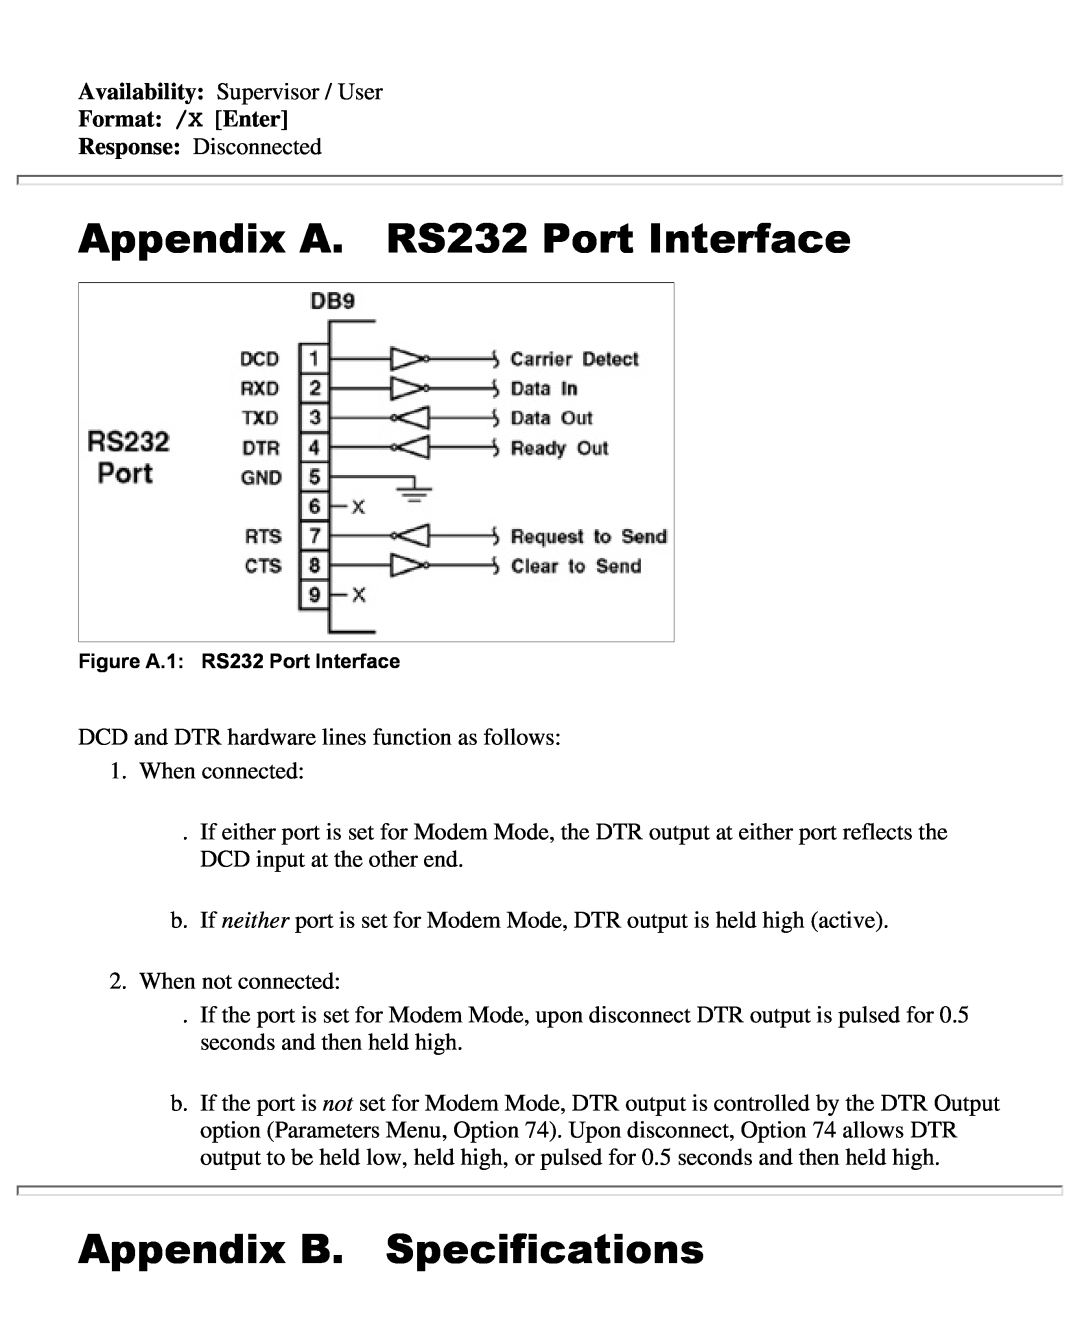 Western Telematic CMS-16 manual Appendix A. RS232 Port Interface, Appendix B. Specifications, Format /X Enter 